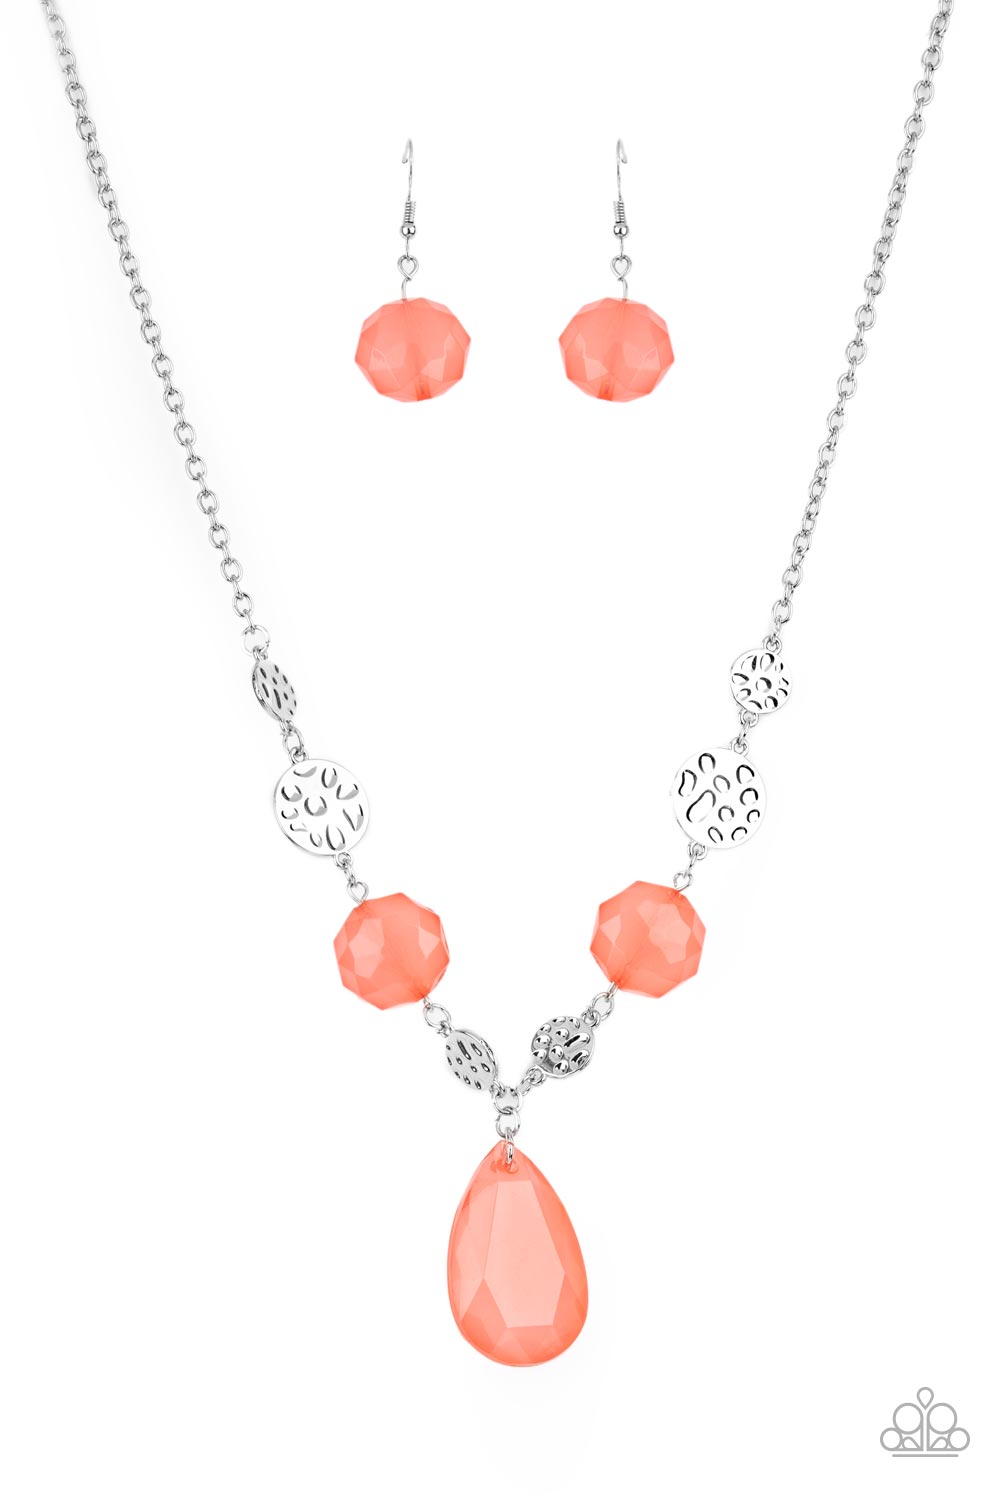 Paparazzi DEW What You Wanna DEW - Orange Necklace - A Finishing Touch Jewelry